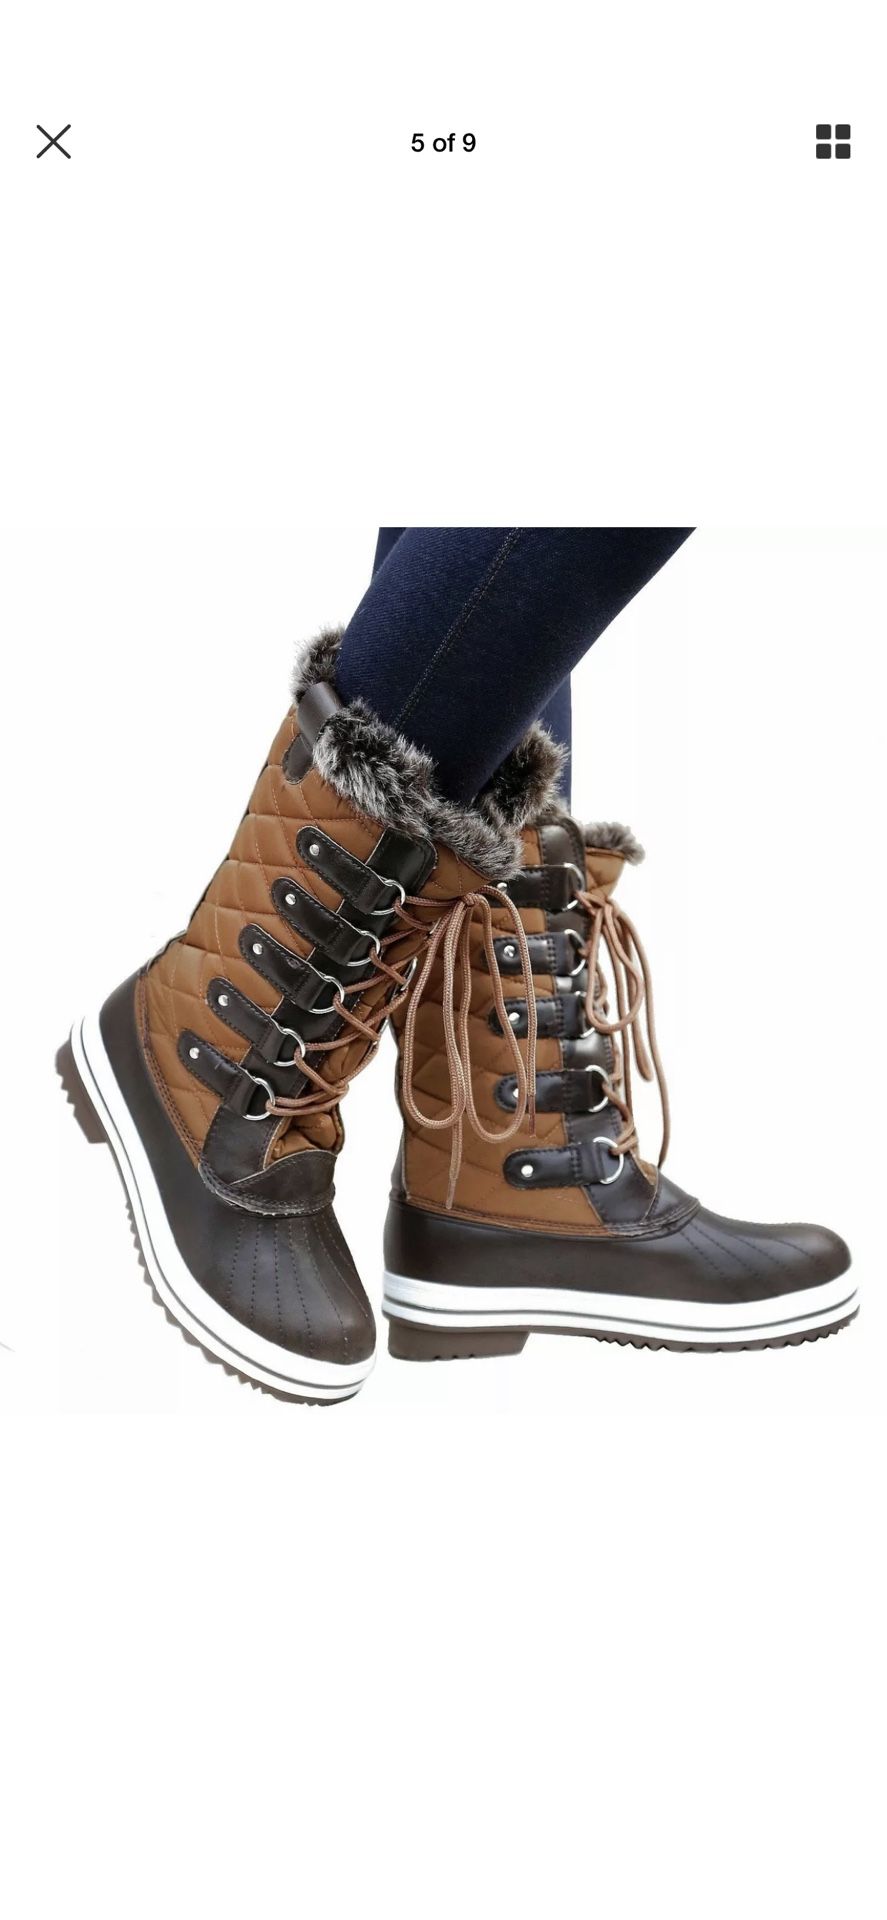 Women’s snow boots / SNOWBOOTS para mujeres sizes available